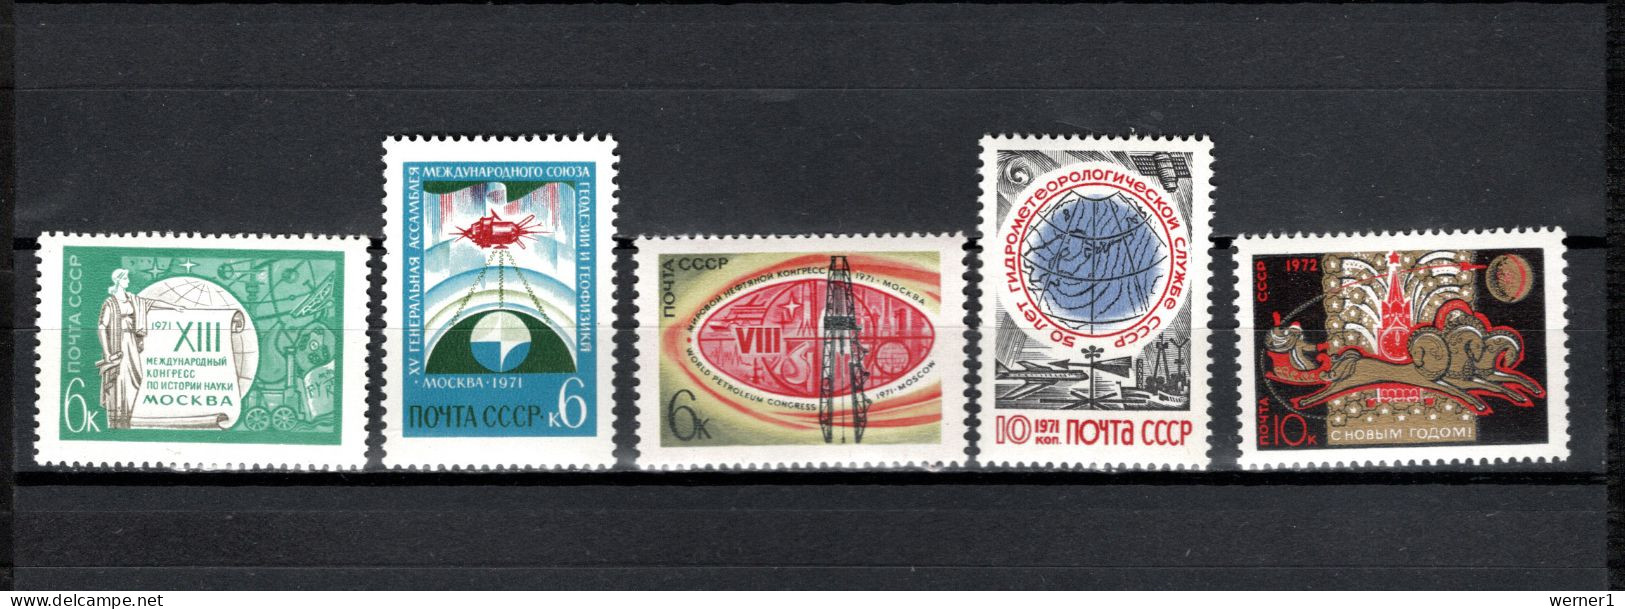 USSR Russia 1971 Space, International Congress Moscow, Meteorology, New Year 5 Stamps MNH - Rusia & URSS